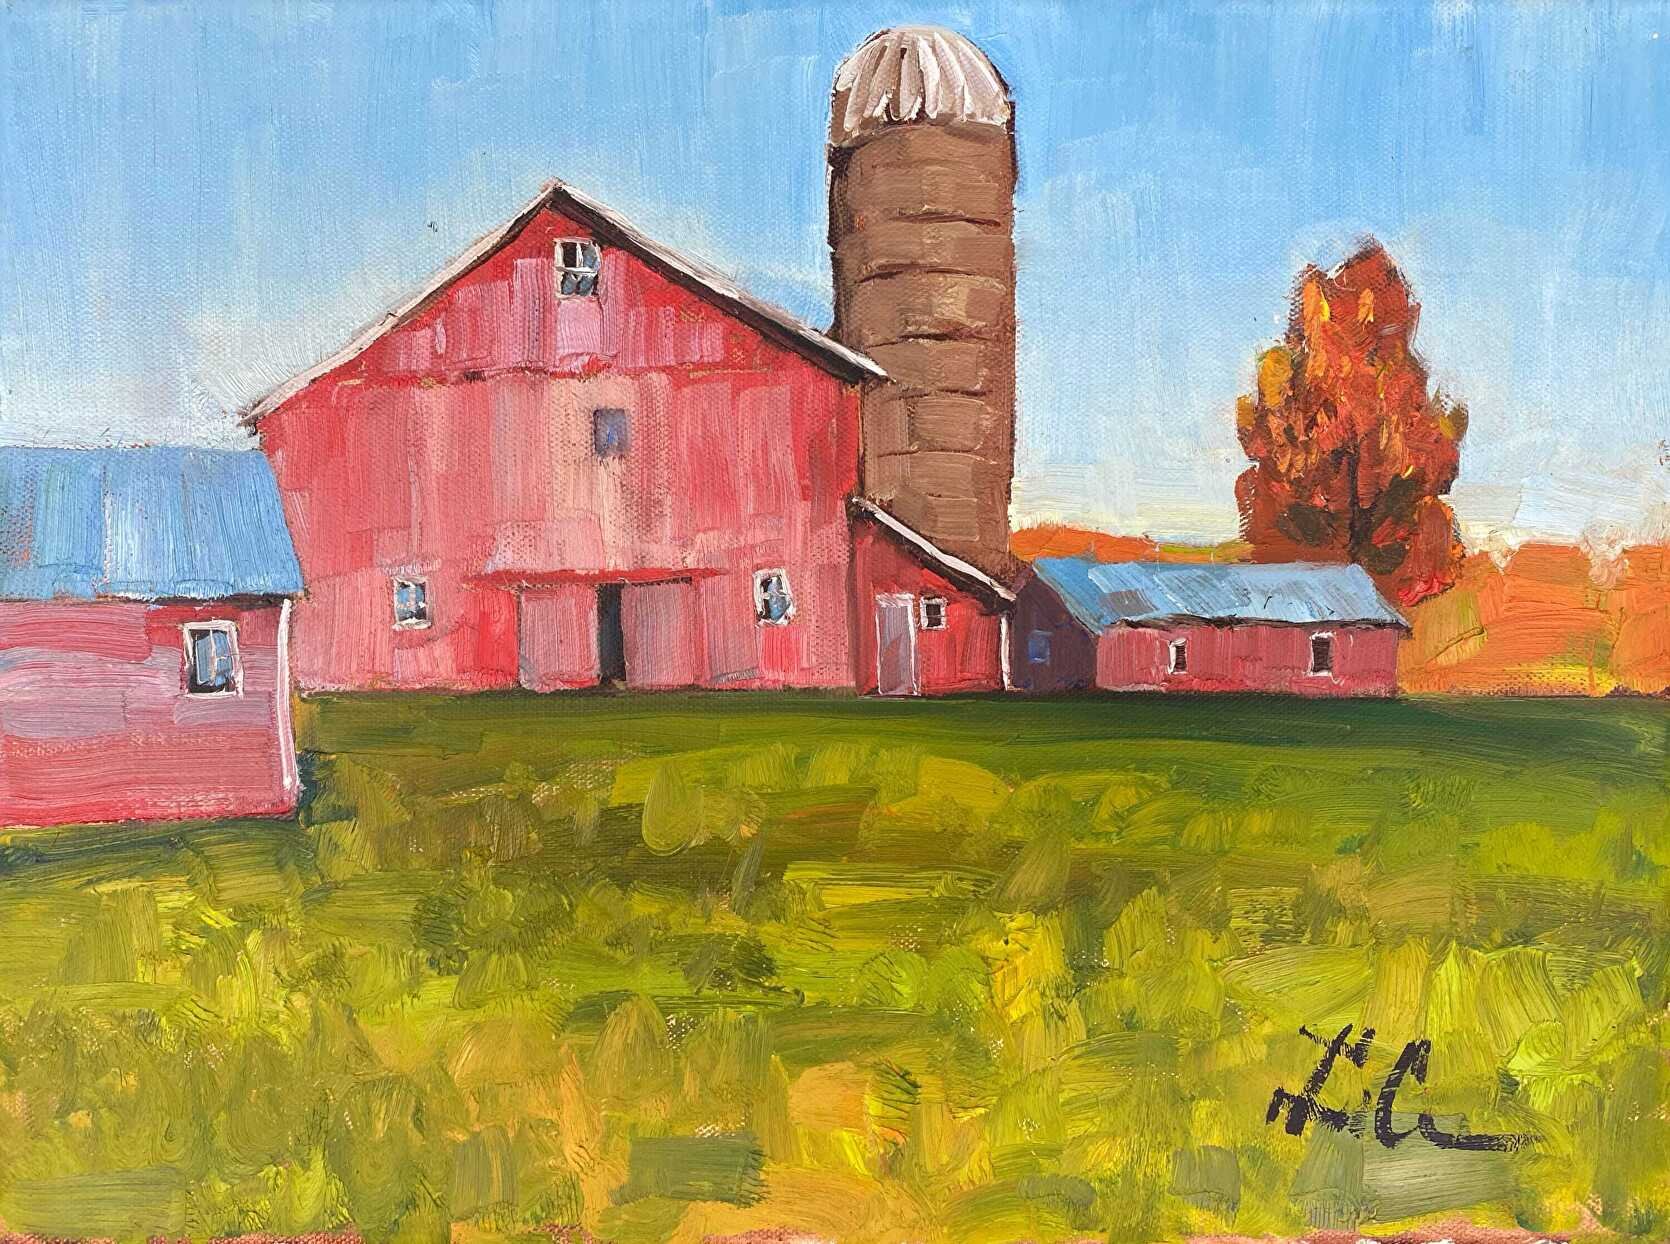    Barn with Silo  , 12” x 16”, pastel on sanded board 